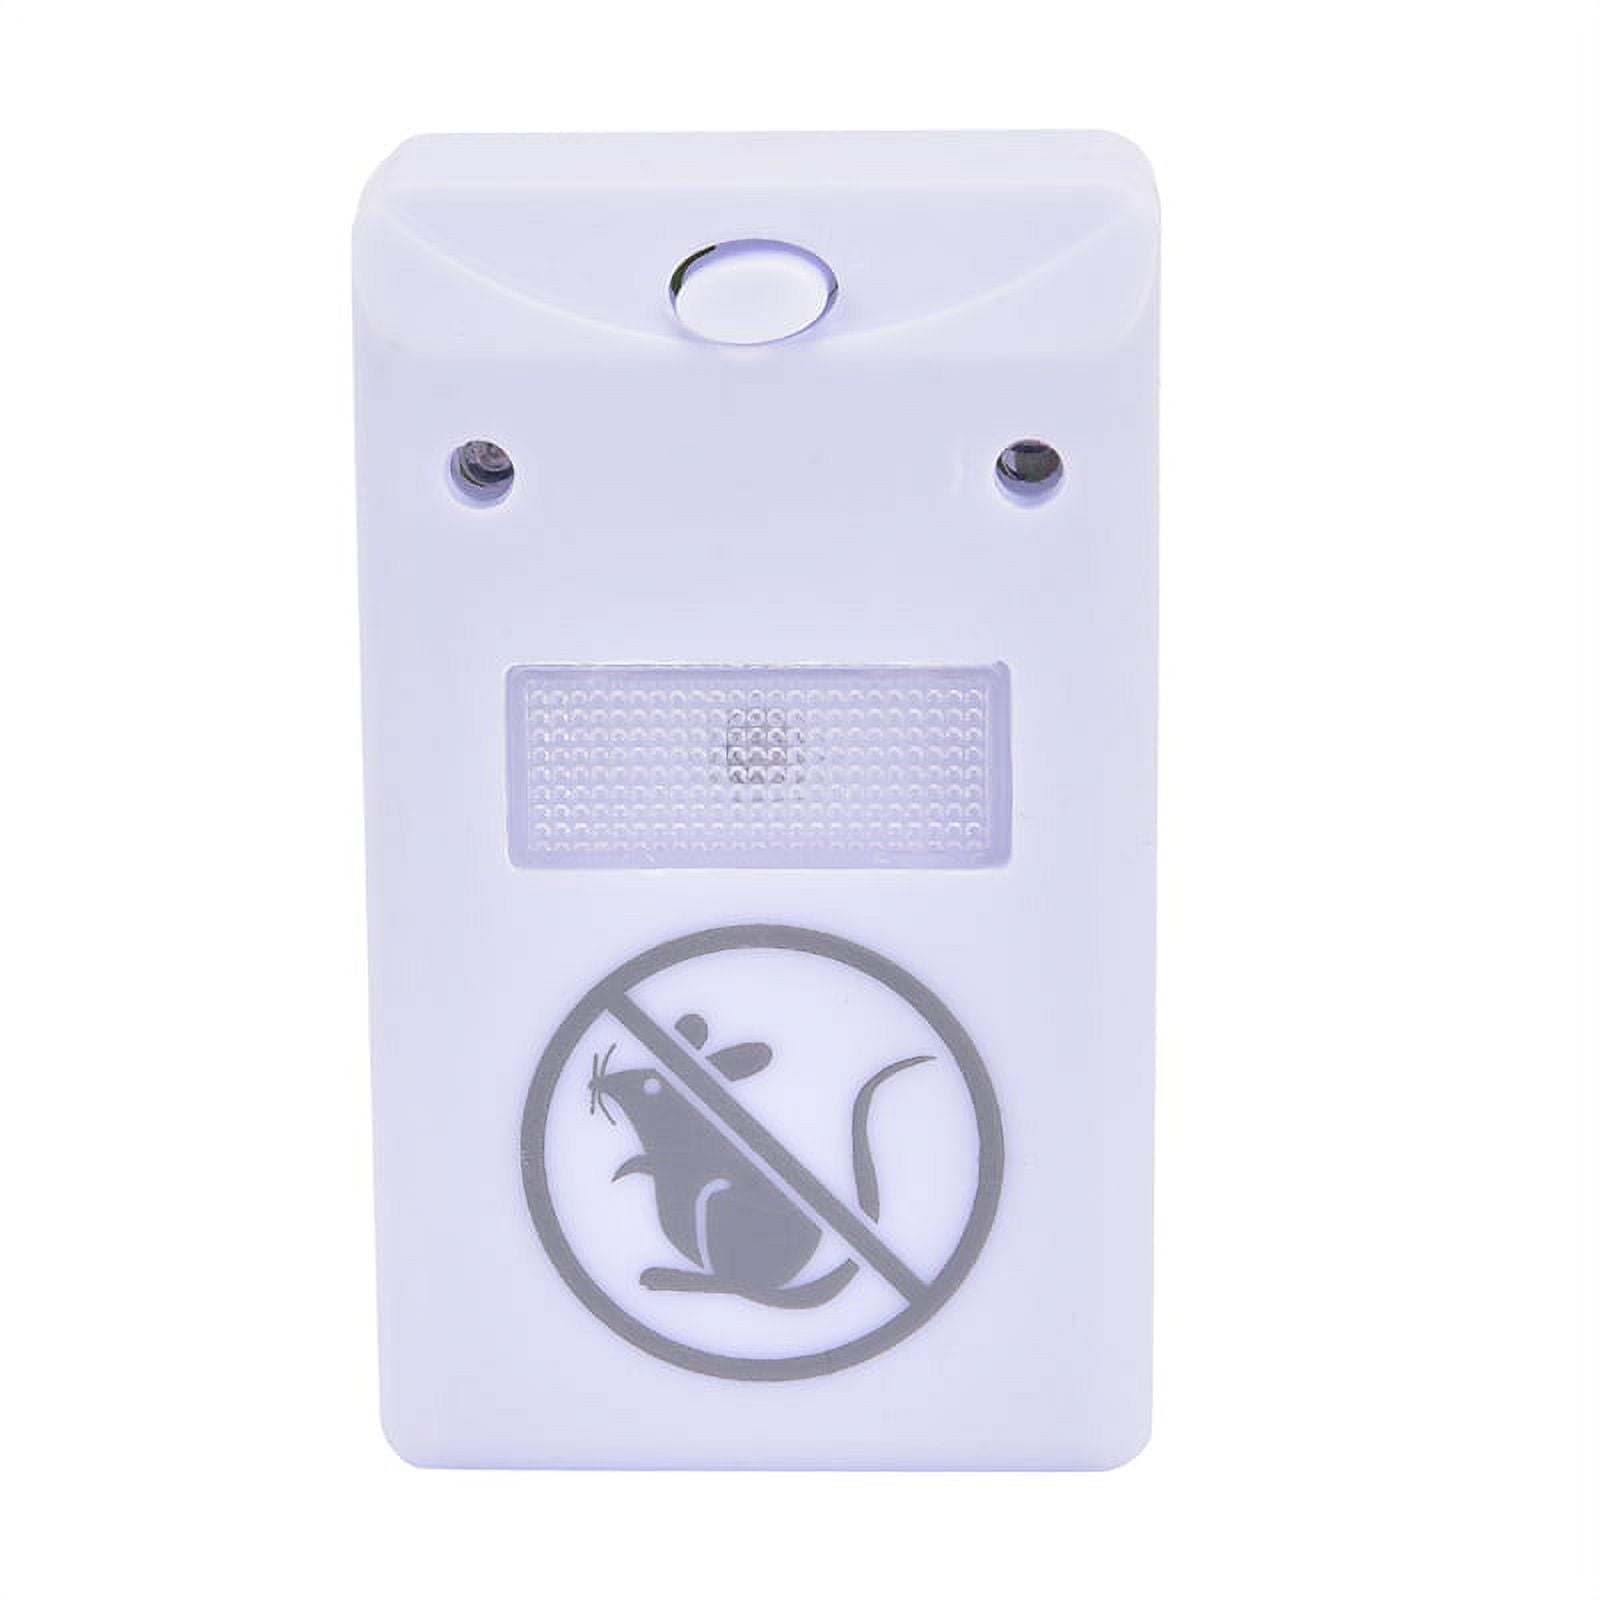 Party Yeah Practical Electronic Repeller Ap Riddex Plus Ultrasonic Pest  Rodent Killer 